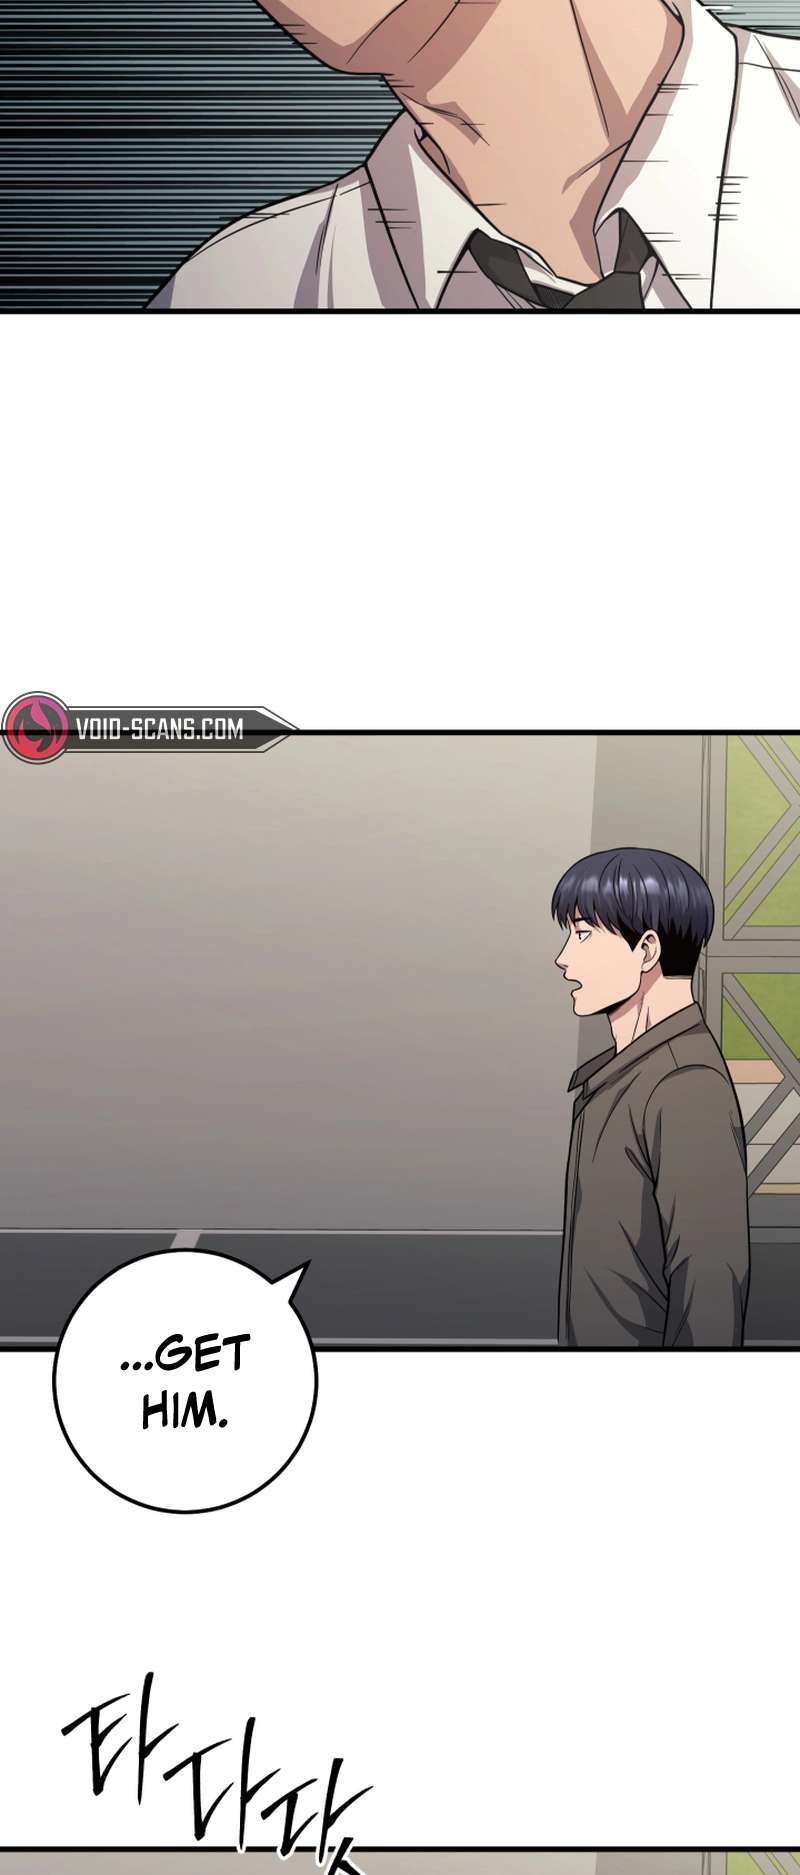 This Life As A Villain - chapter 26 - #5